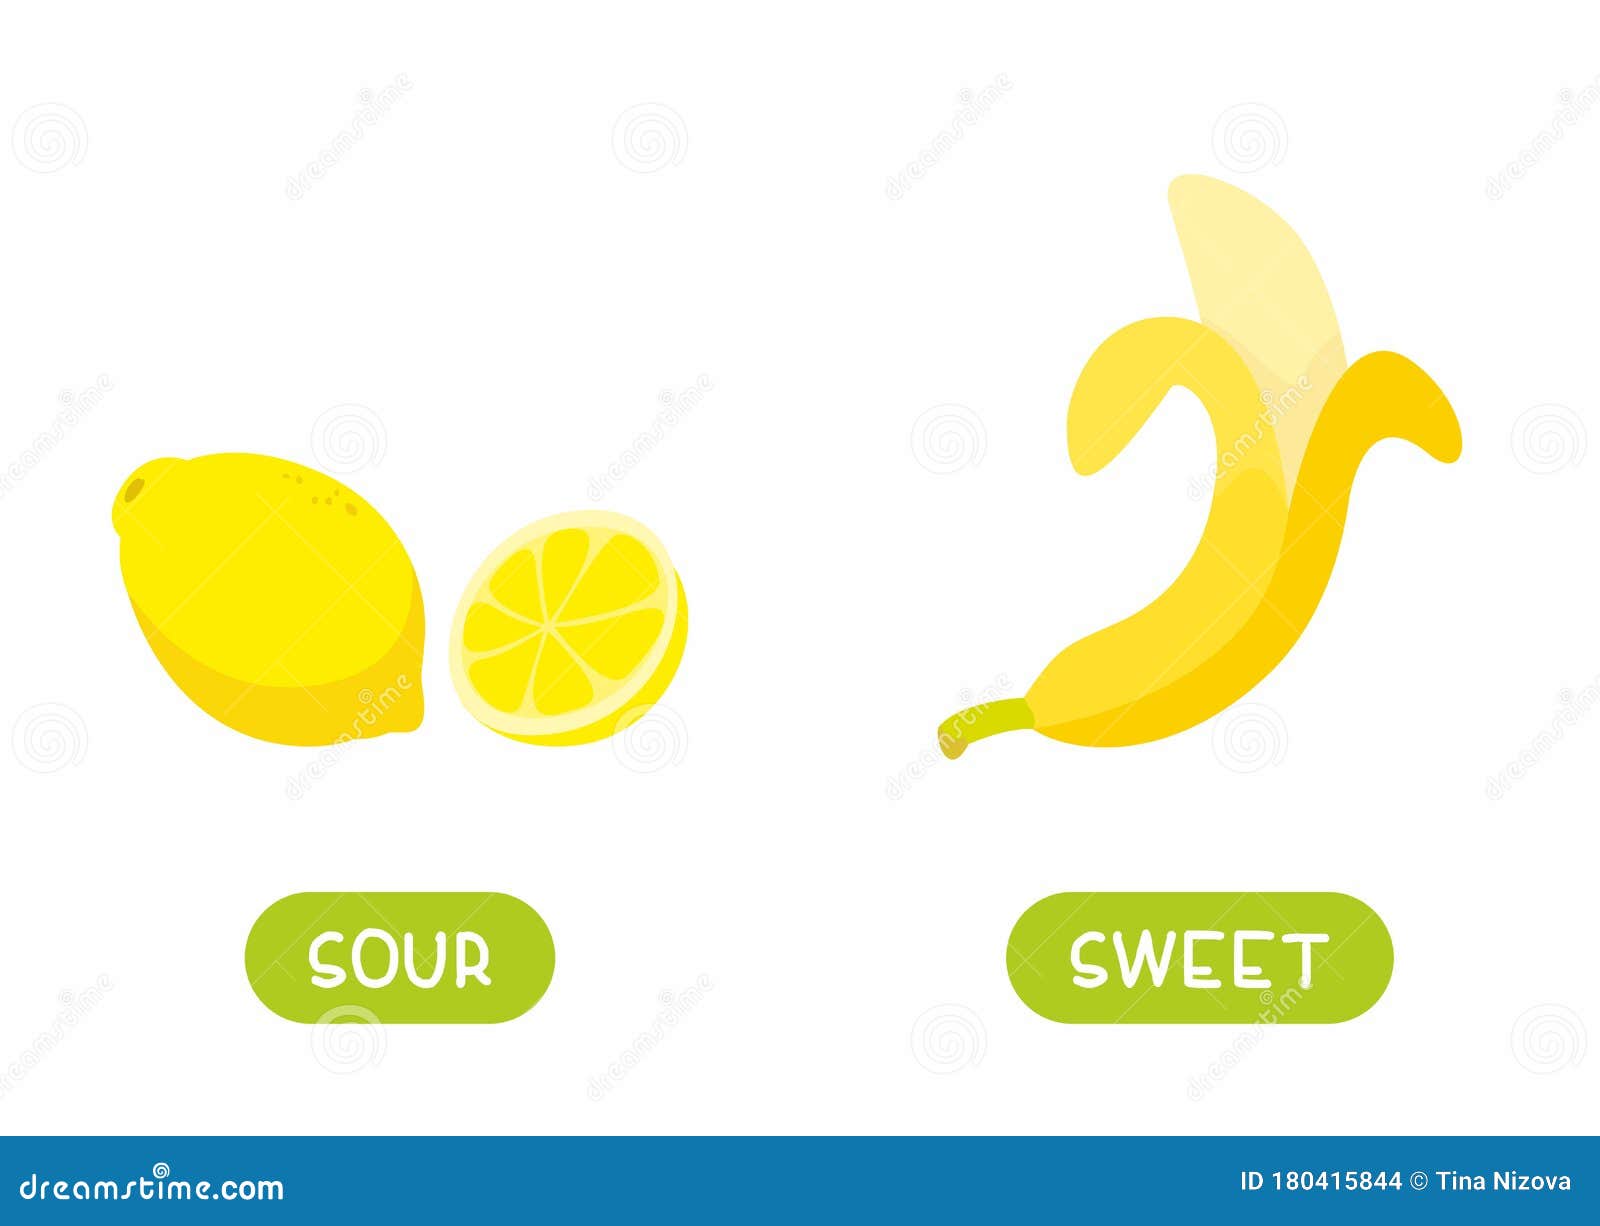 Antonyms Concept Sour And Sweet Stock Illustration Illustration Of Fruits English